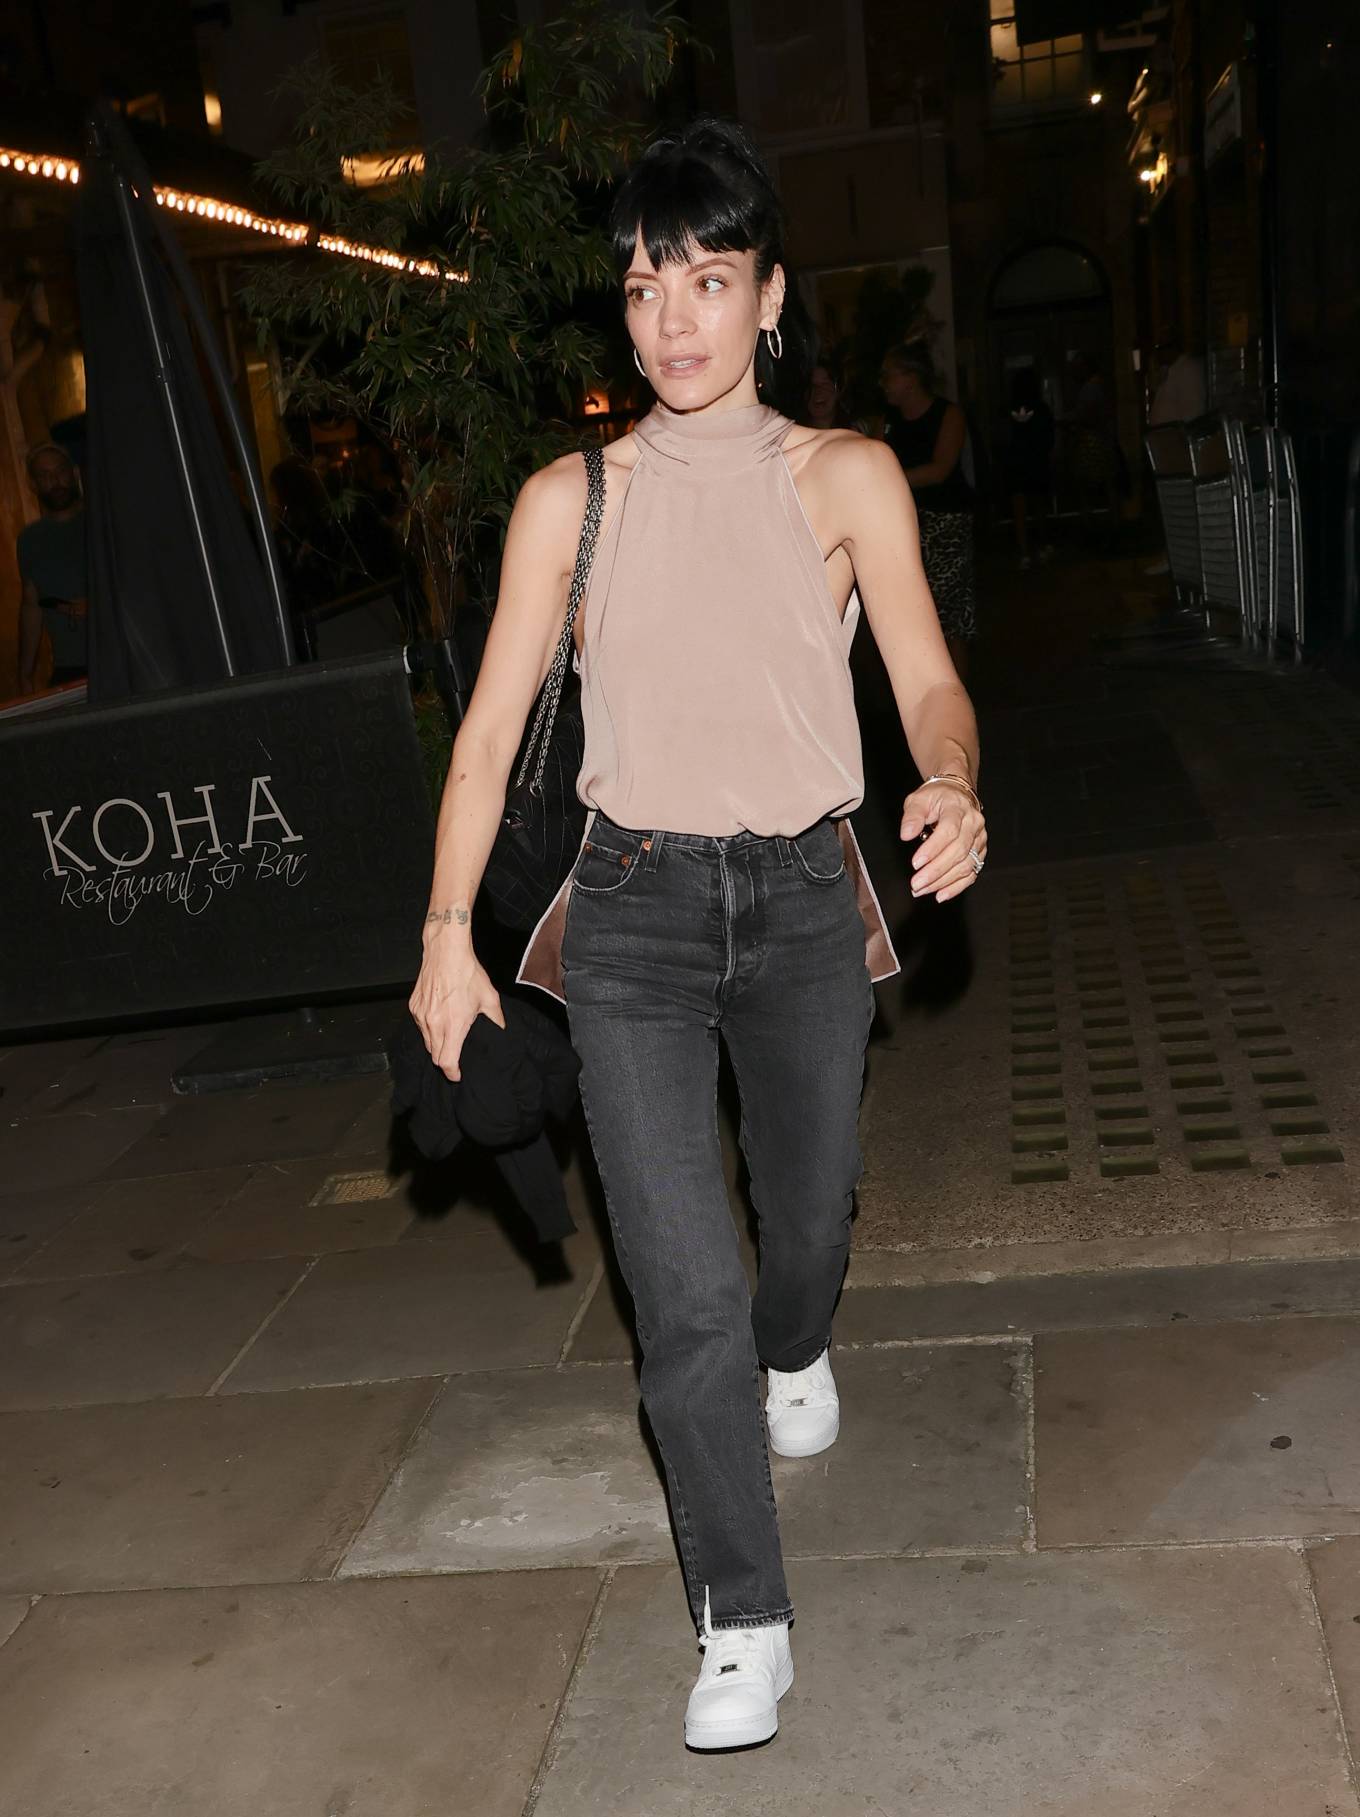 Lily Allen 2021 : Lily Allen – In a denim at 22.2A Ghost Story theatre night in London-09